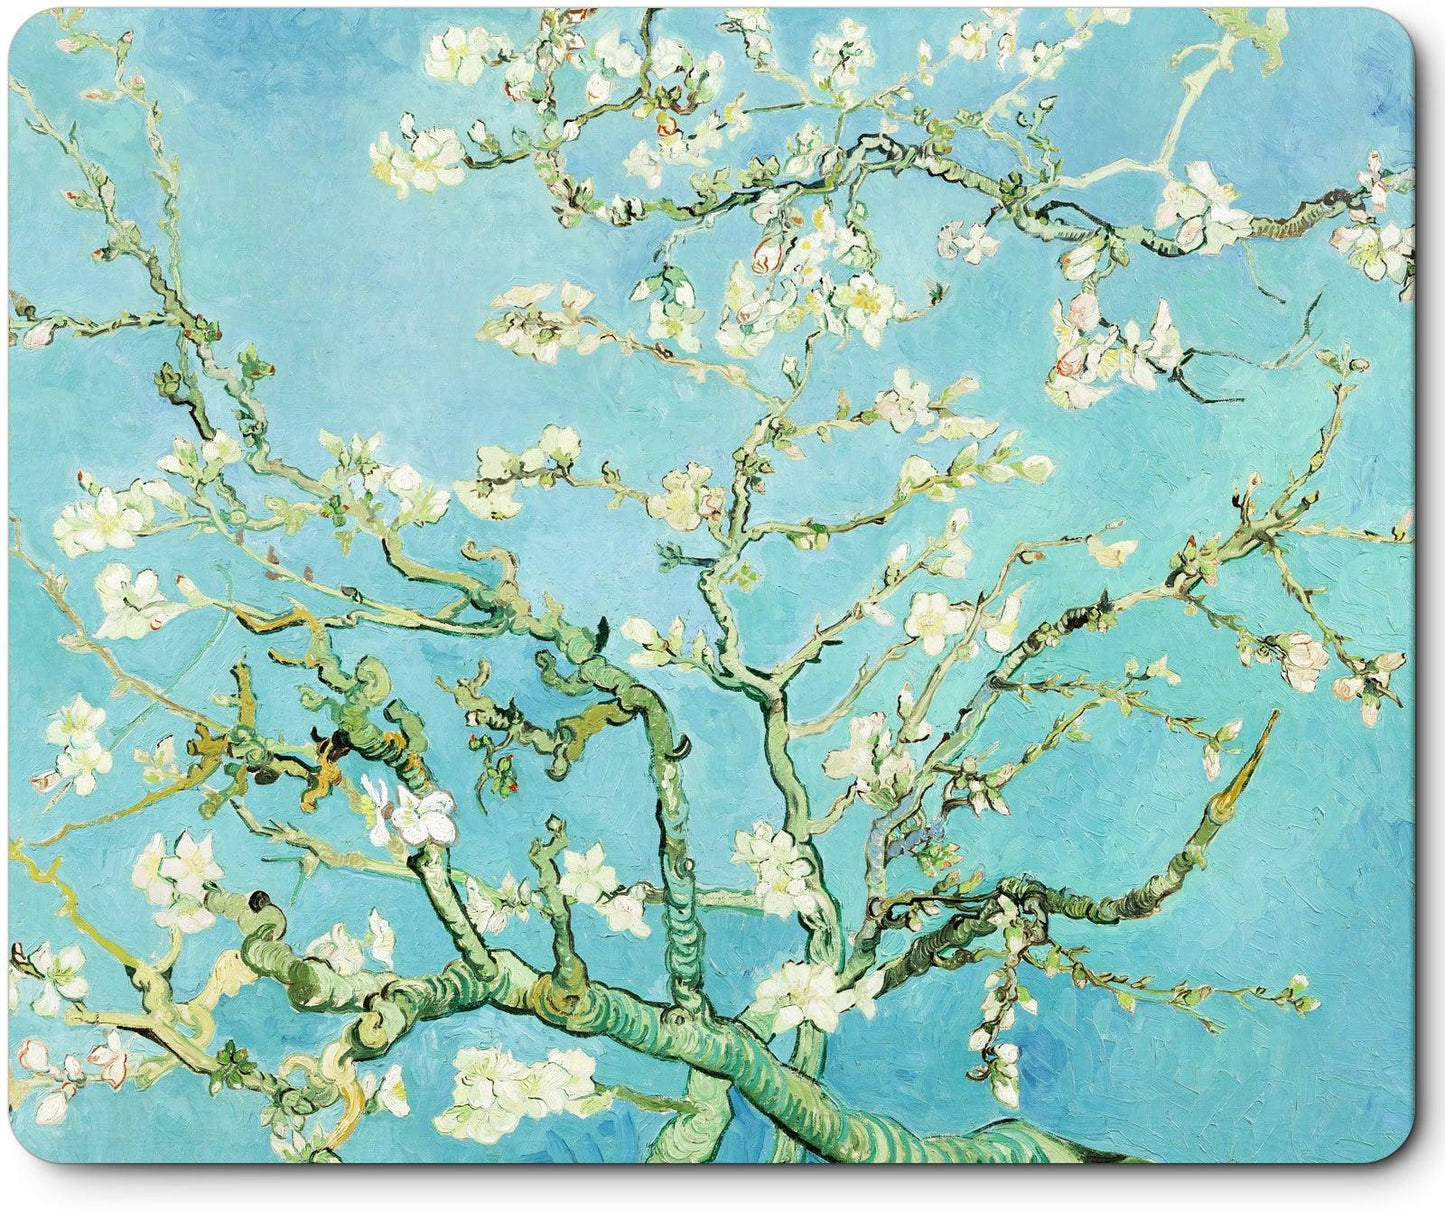 Art Square Mouse Pad 9.5 x 7.9 Inches (Almond blossom by Vincent van Gogh) - Berkin Arts